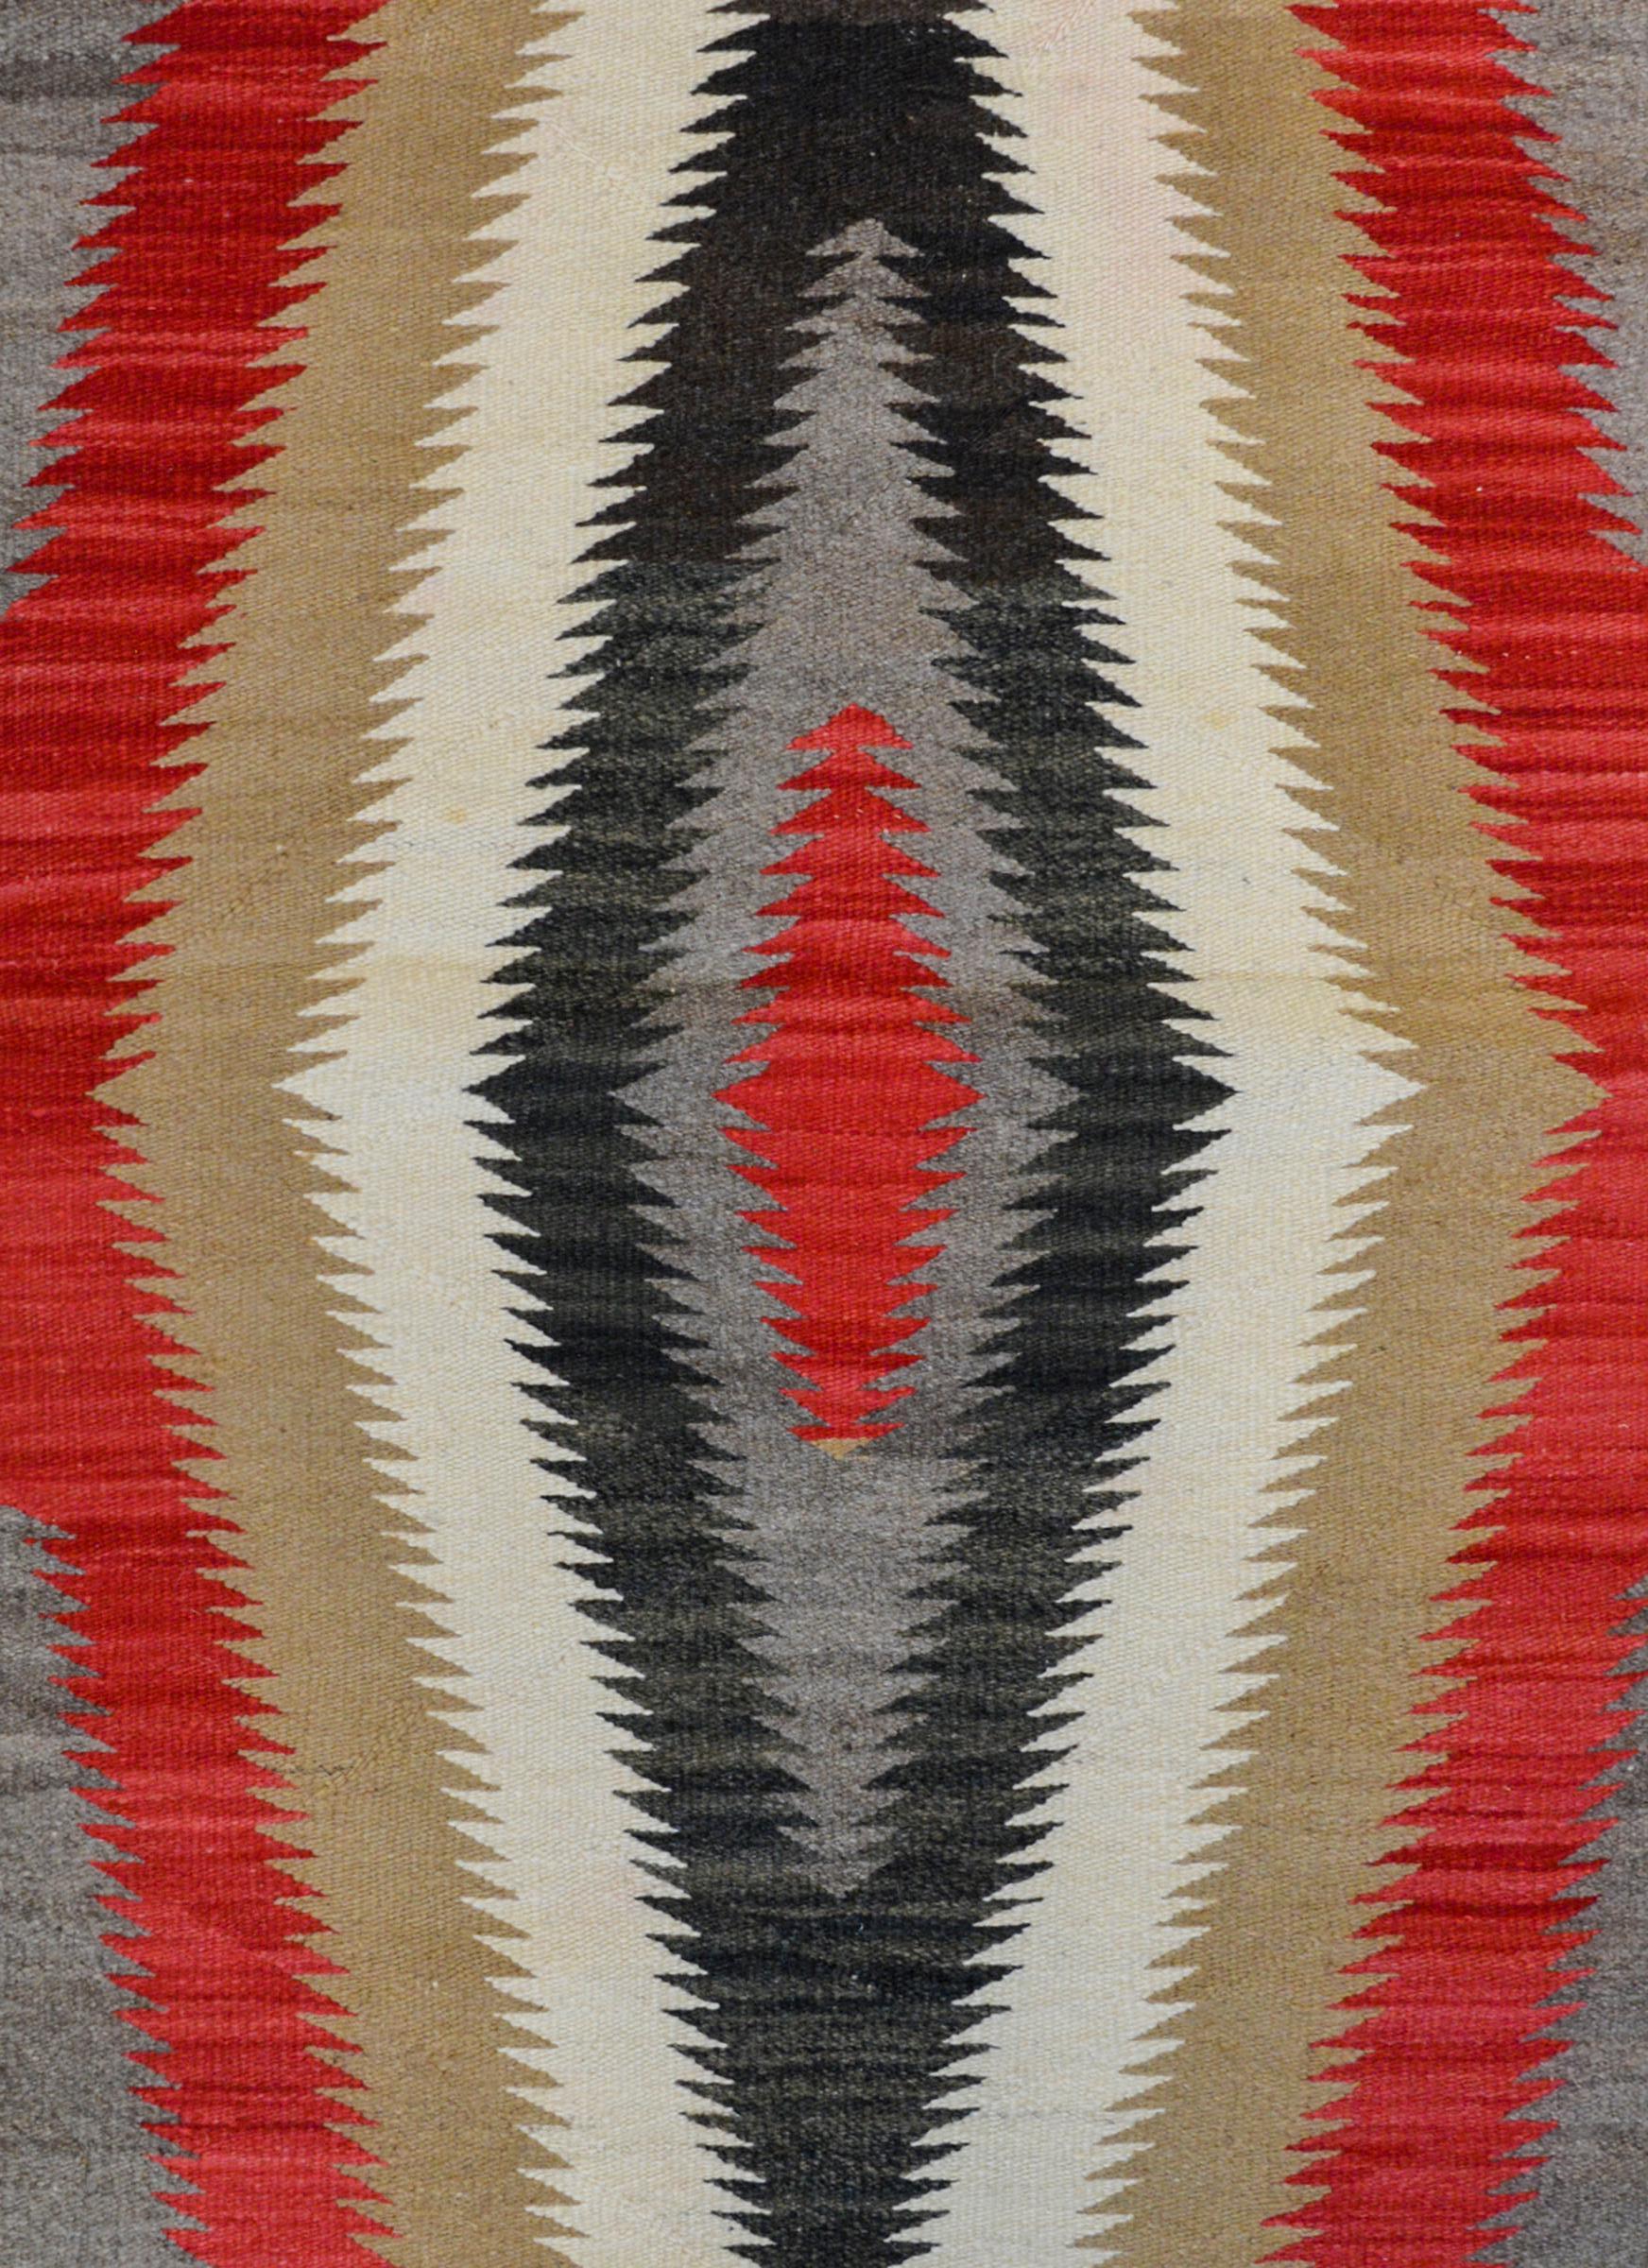 An exciting early 20th century Navajo rug with a beautiful radiating diamond pattern woven in crimson, gray, black, white, and tan wool surrounded by a solid white and black stripe border.